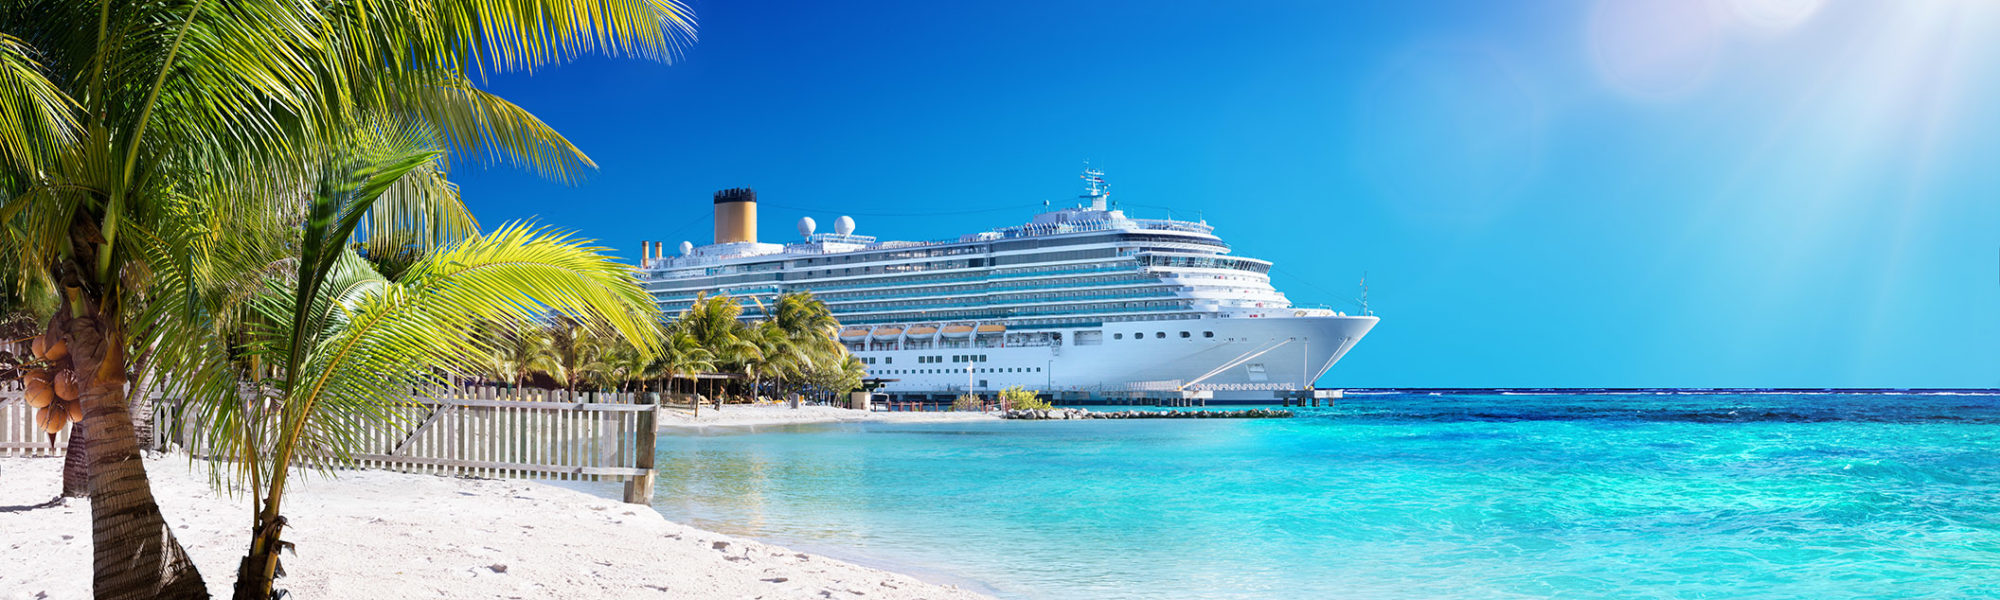 Large cruise ship sailing the clear blue tropical waters beside a sandy beach with Jaya Travel & Tours.